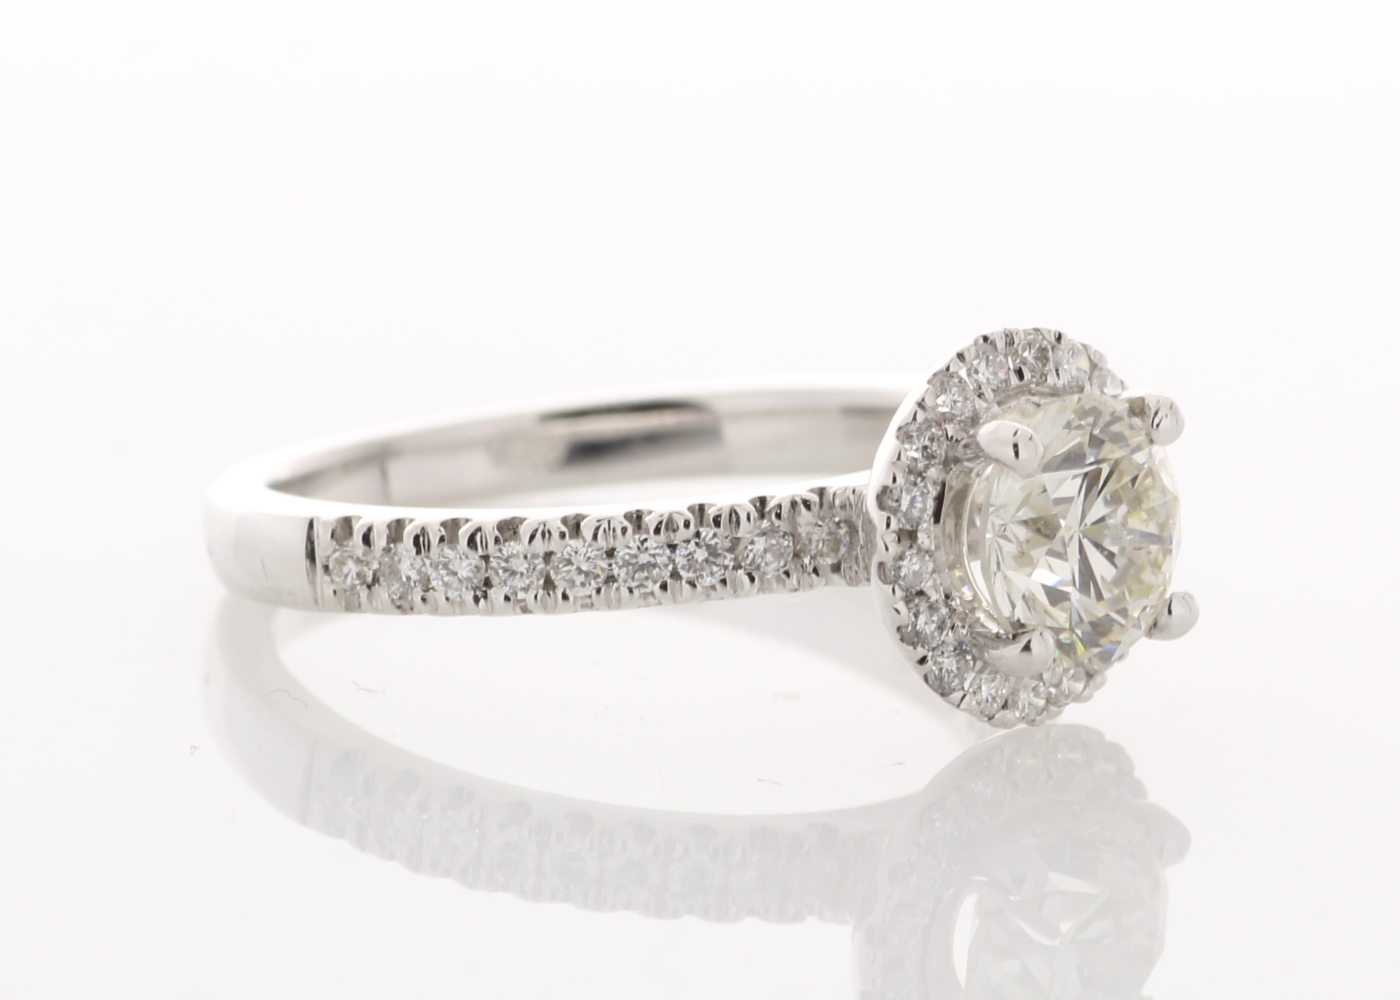 18ct White Gold Single Stone With Halo Setting Ring (1.01) 1.37 Carats - Valued By IDI £32,370. - Image 4 of 5